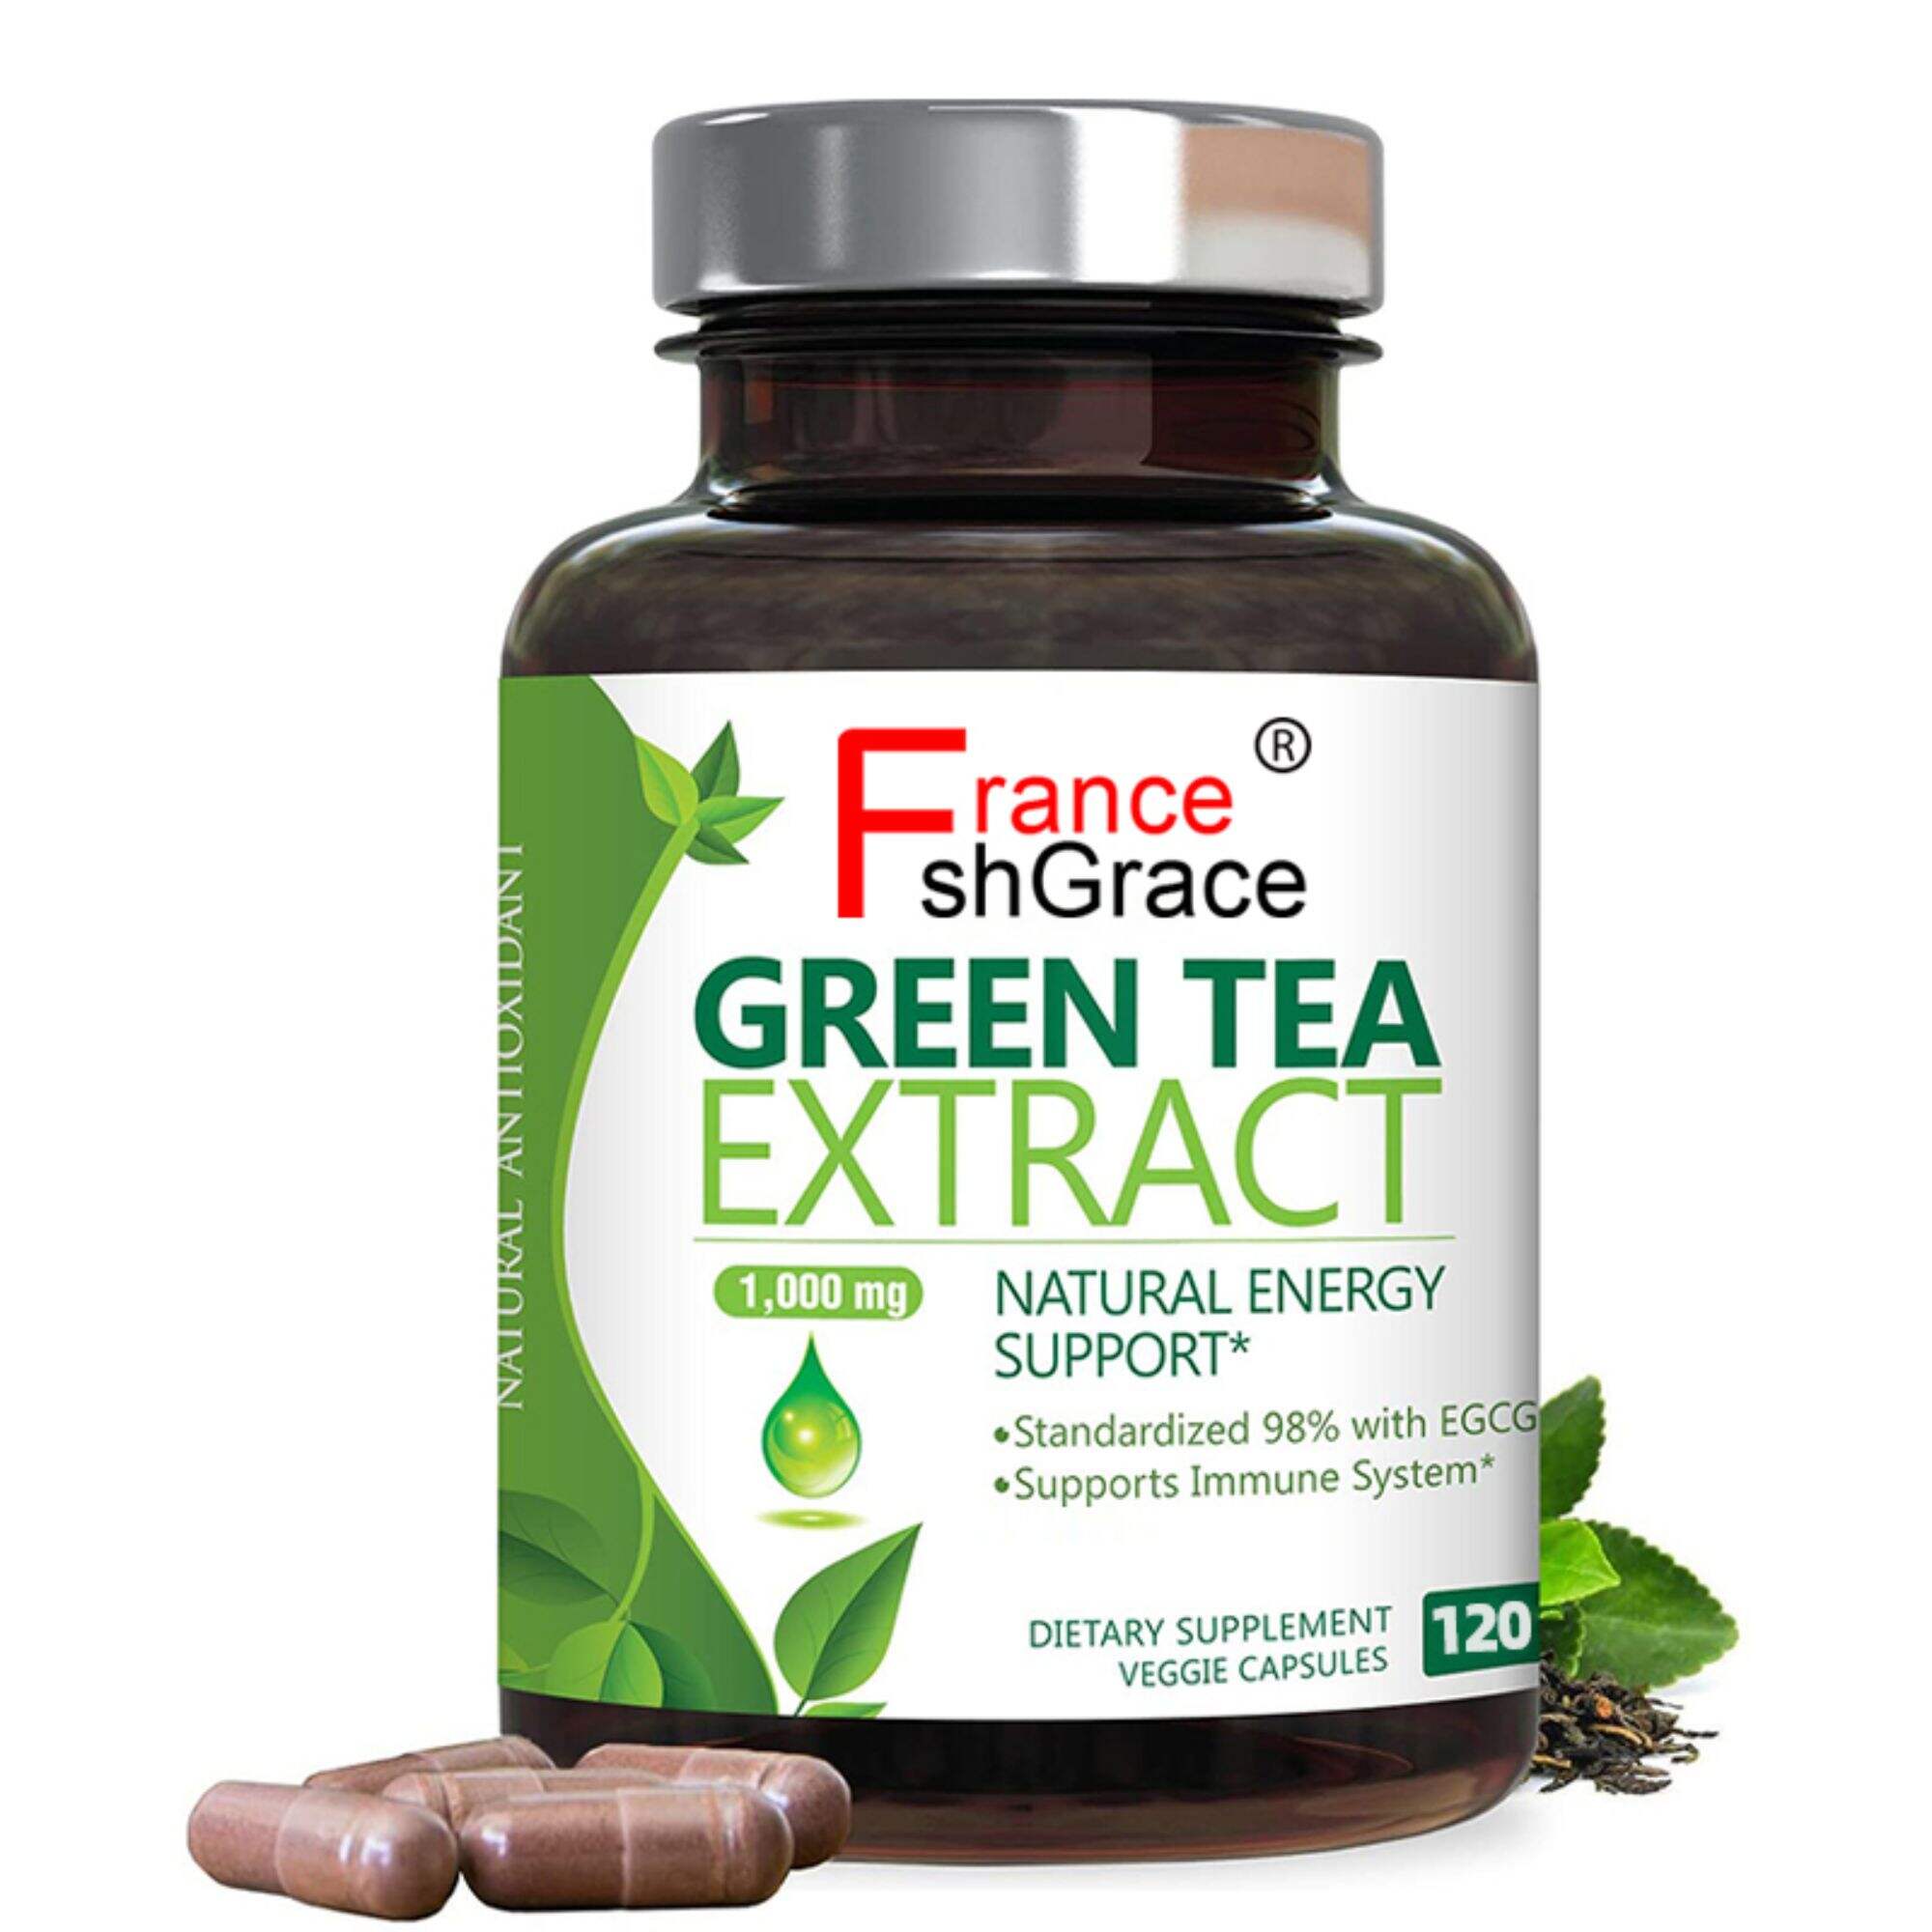 Green Tea Extract 98% Standardized EGCG for Natural Energy 1000mg